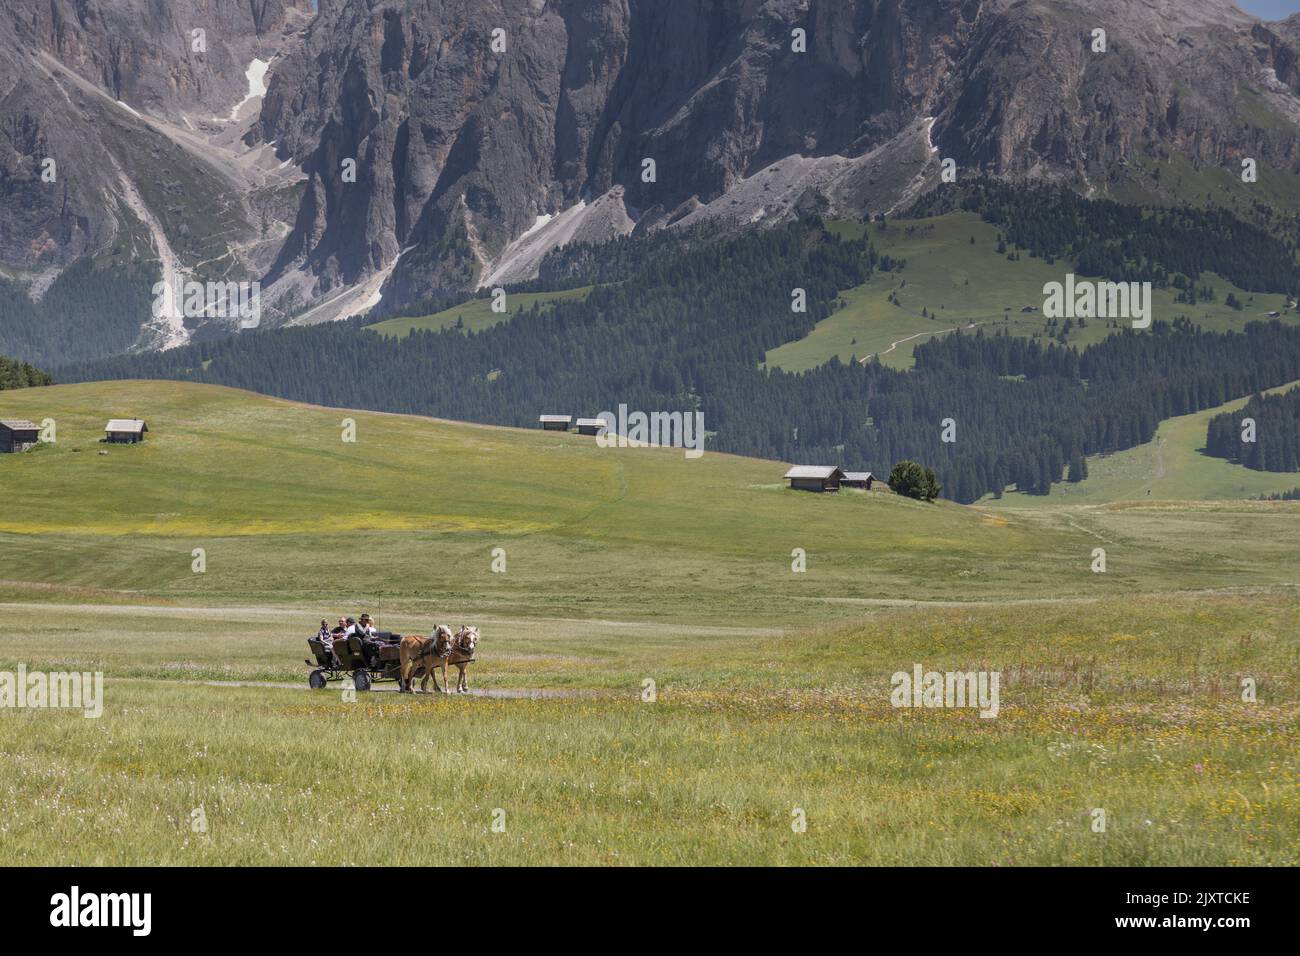 A traditional horse drawn cart transports tourists across the Alpi di Siusi in Val Gardena in the Italian Dolomites. Stock Photo